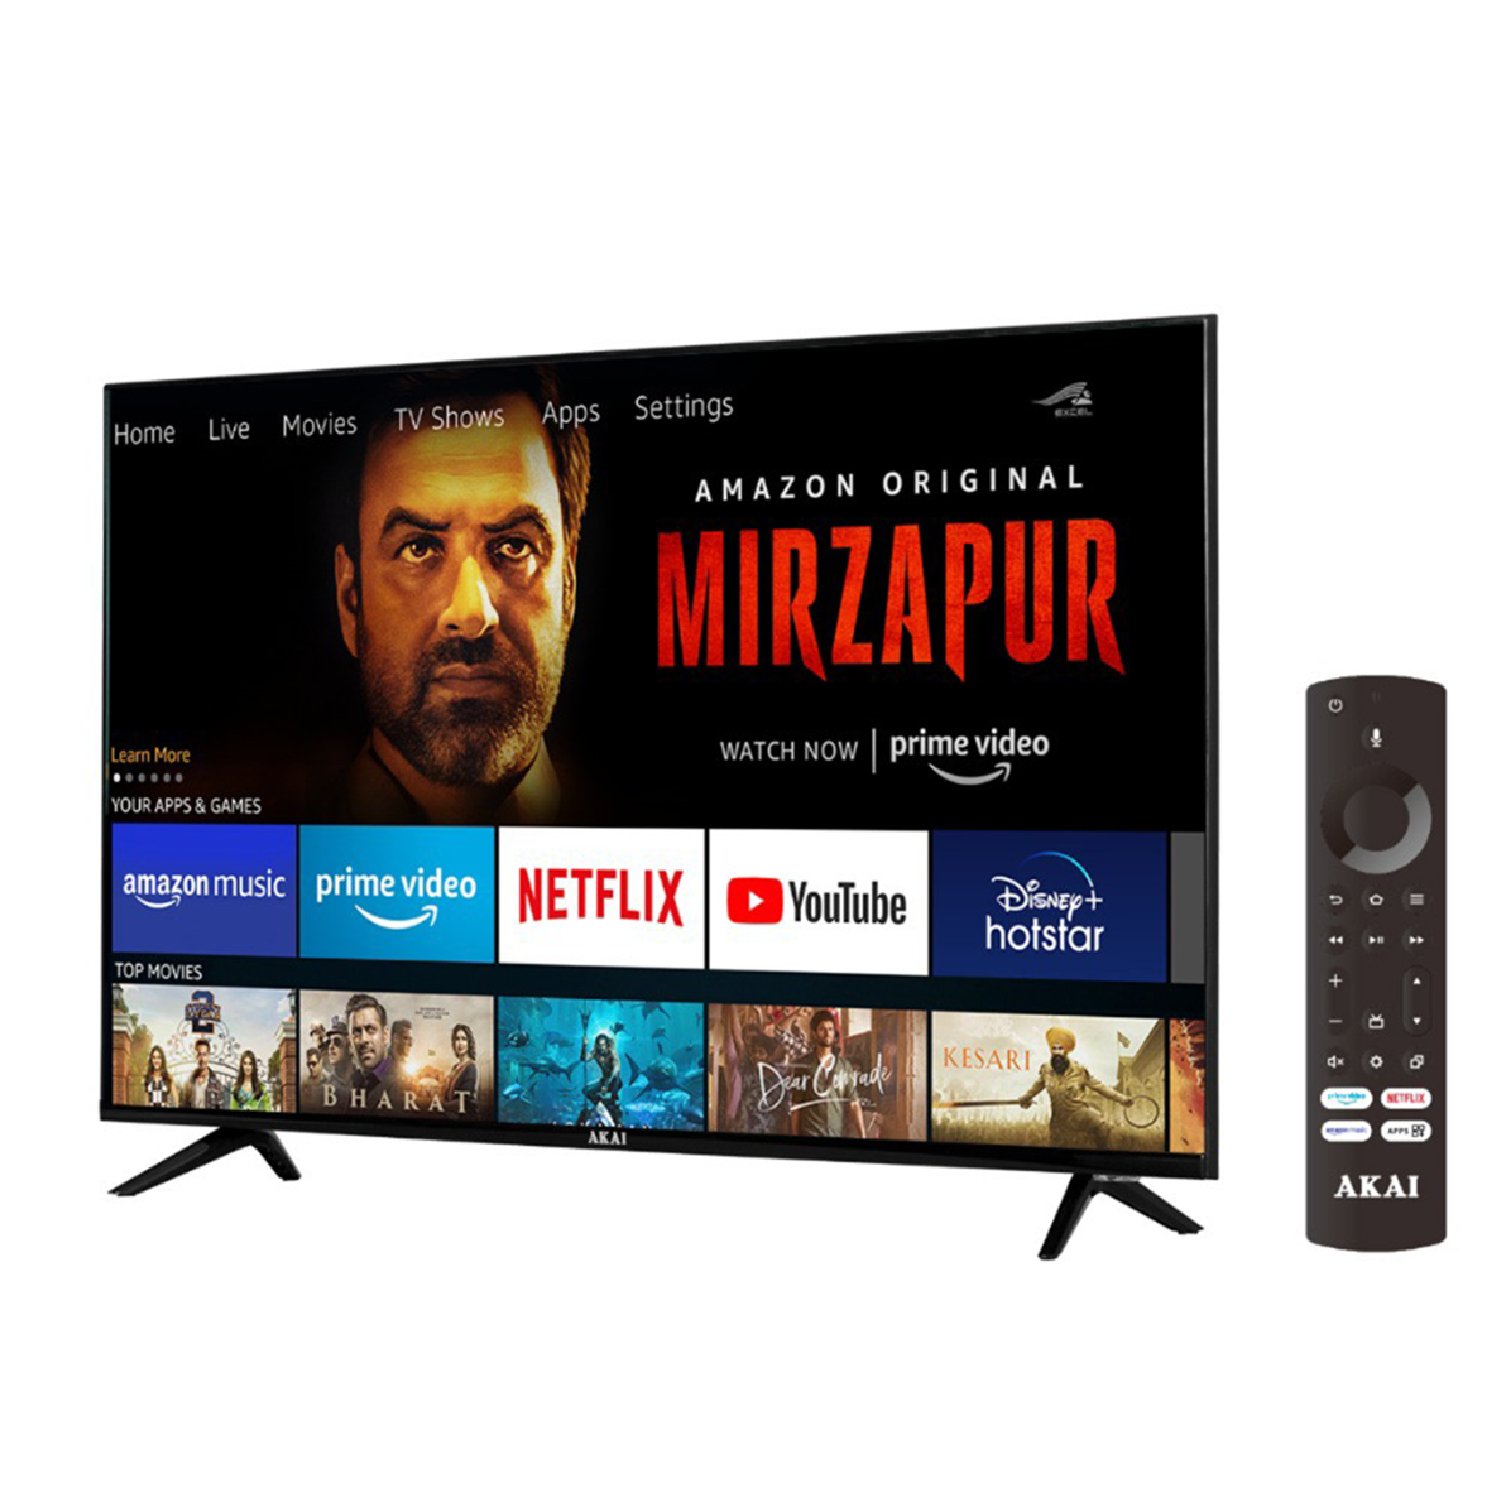 Akai Amazon Fire TV Edition smart LED TV series launched in India